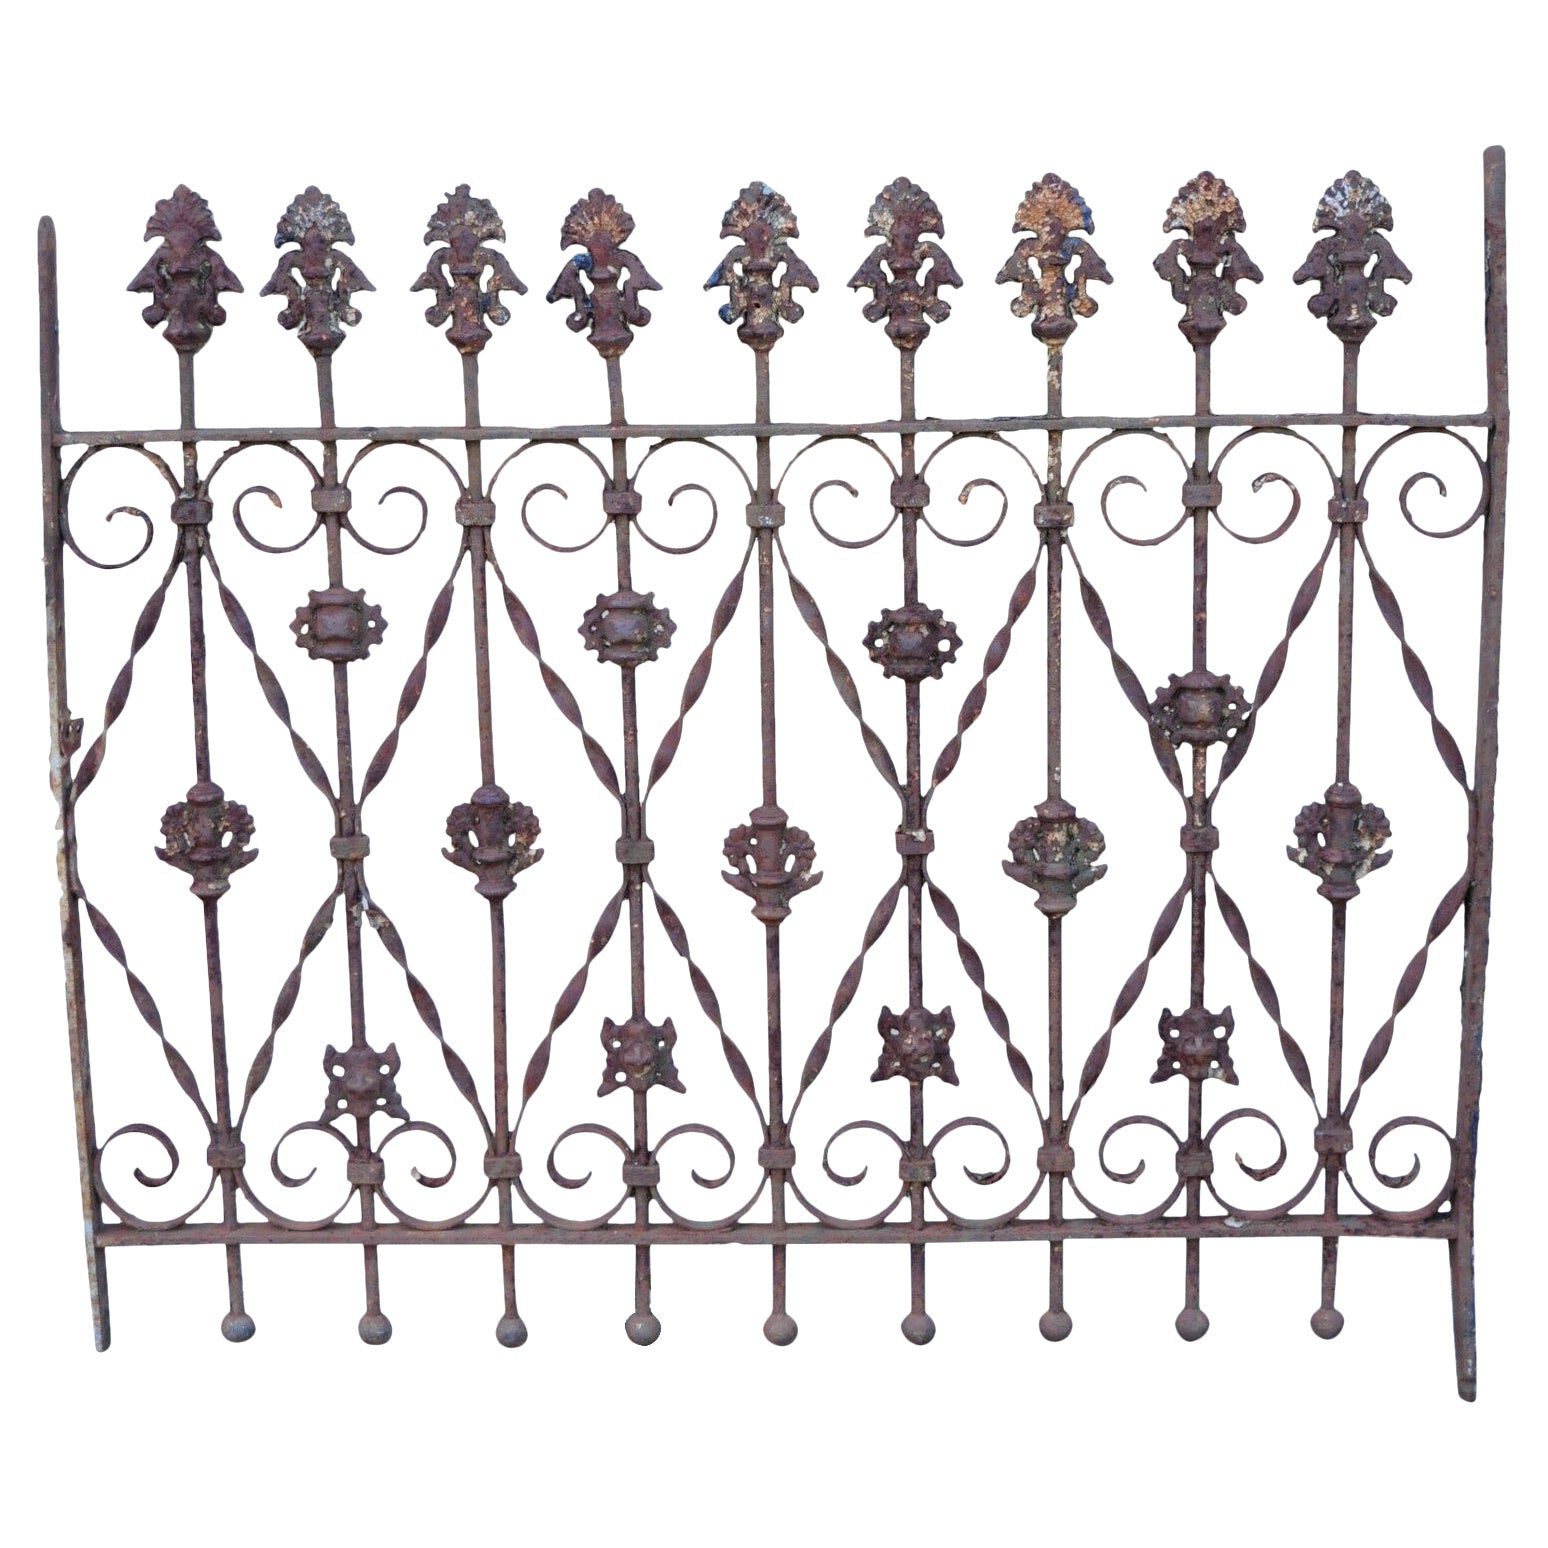 Antique Victorian Wrought Iron Ornate Gate Fence Architectural Element